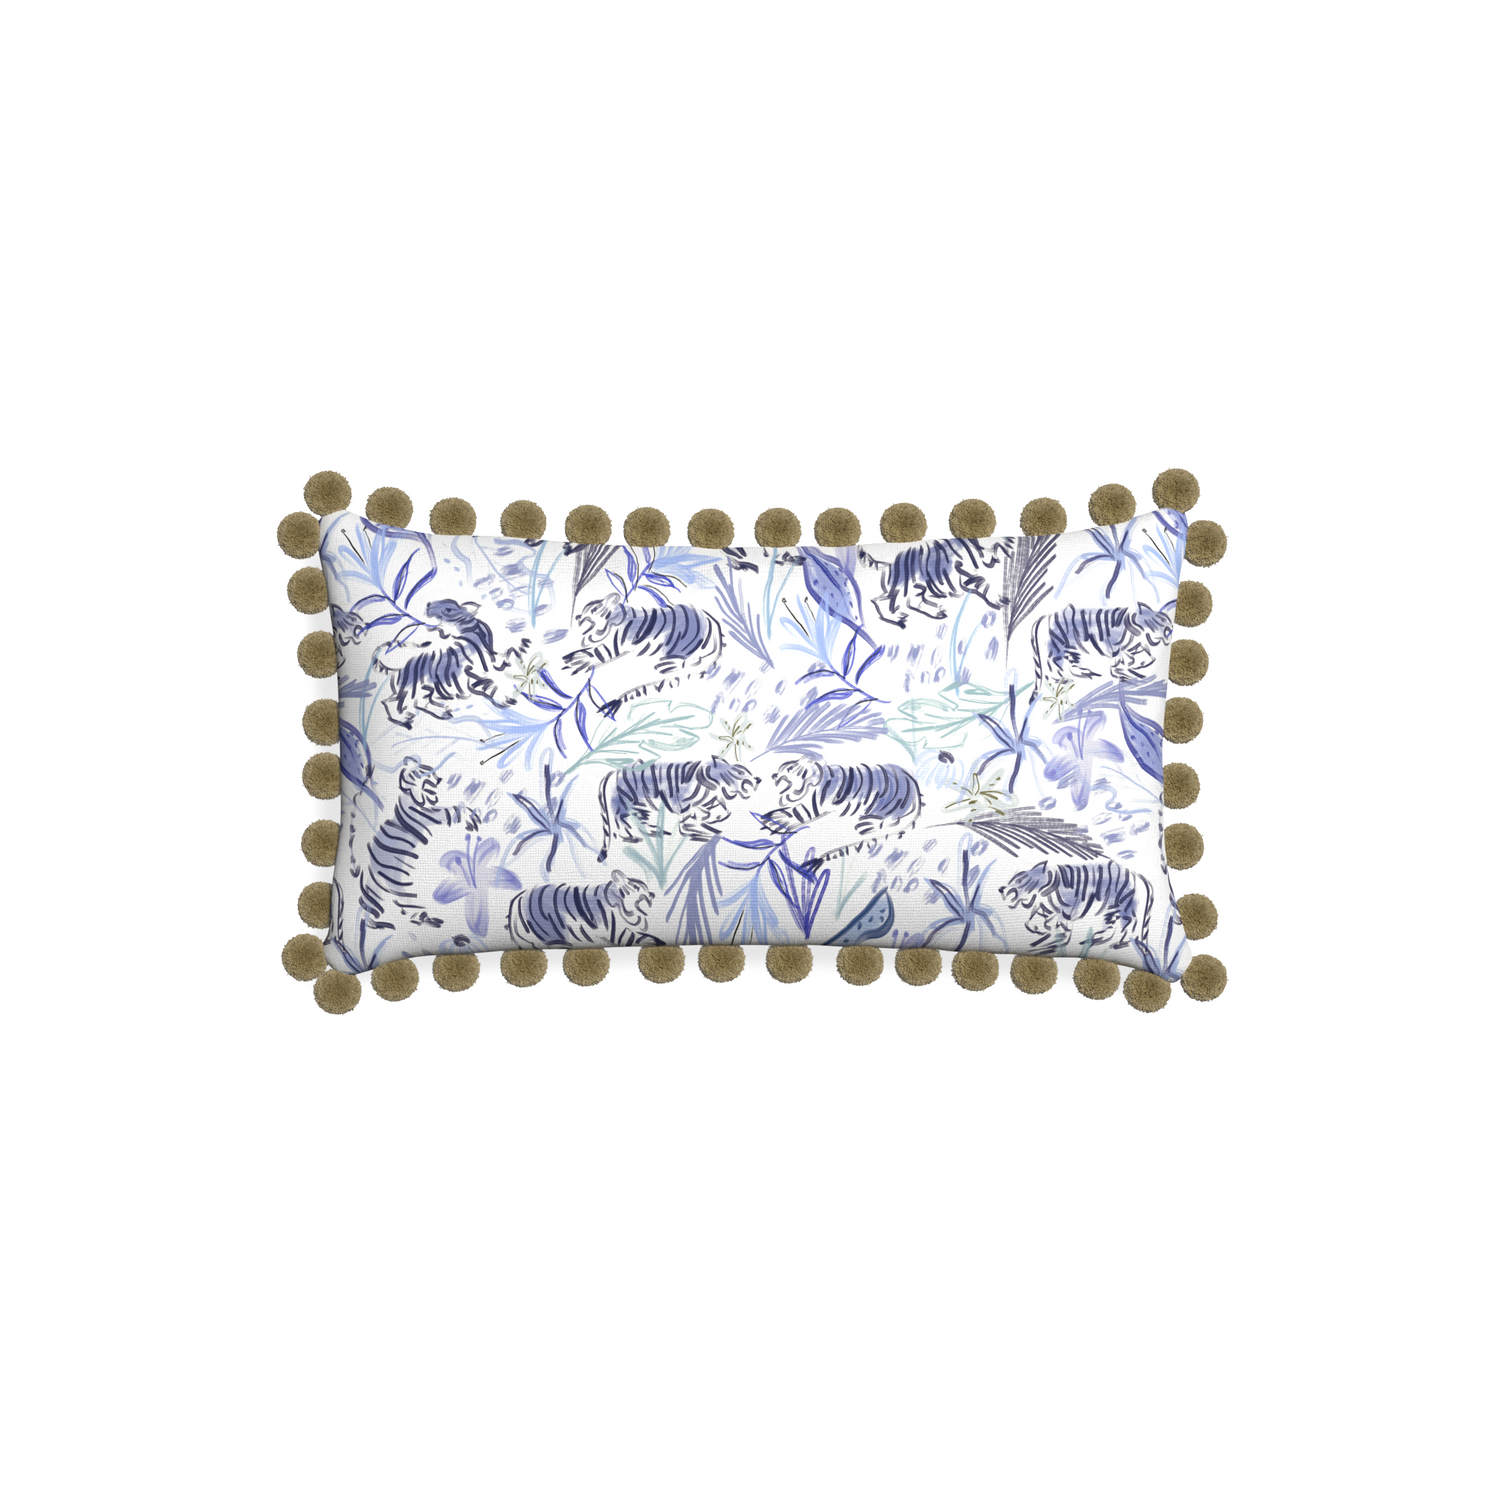 Petite-lumbar frida blue custom blue with intricate tiger designpillow with olive pom pom on white background